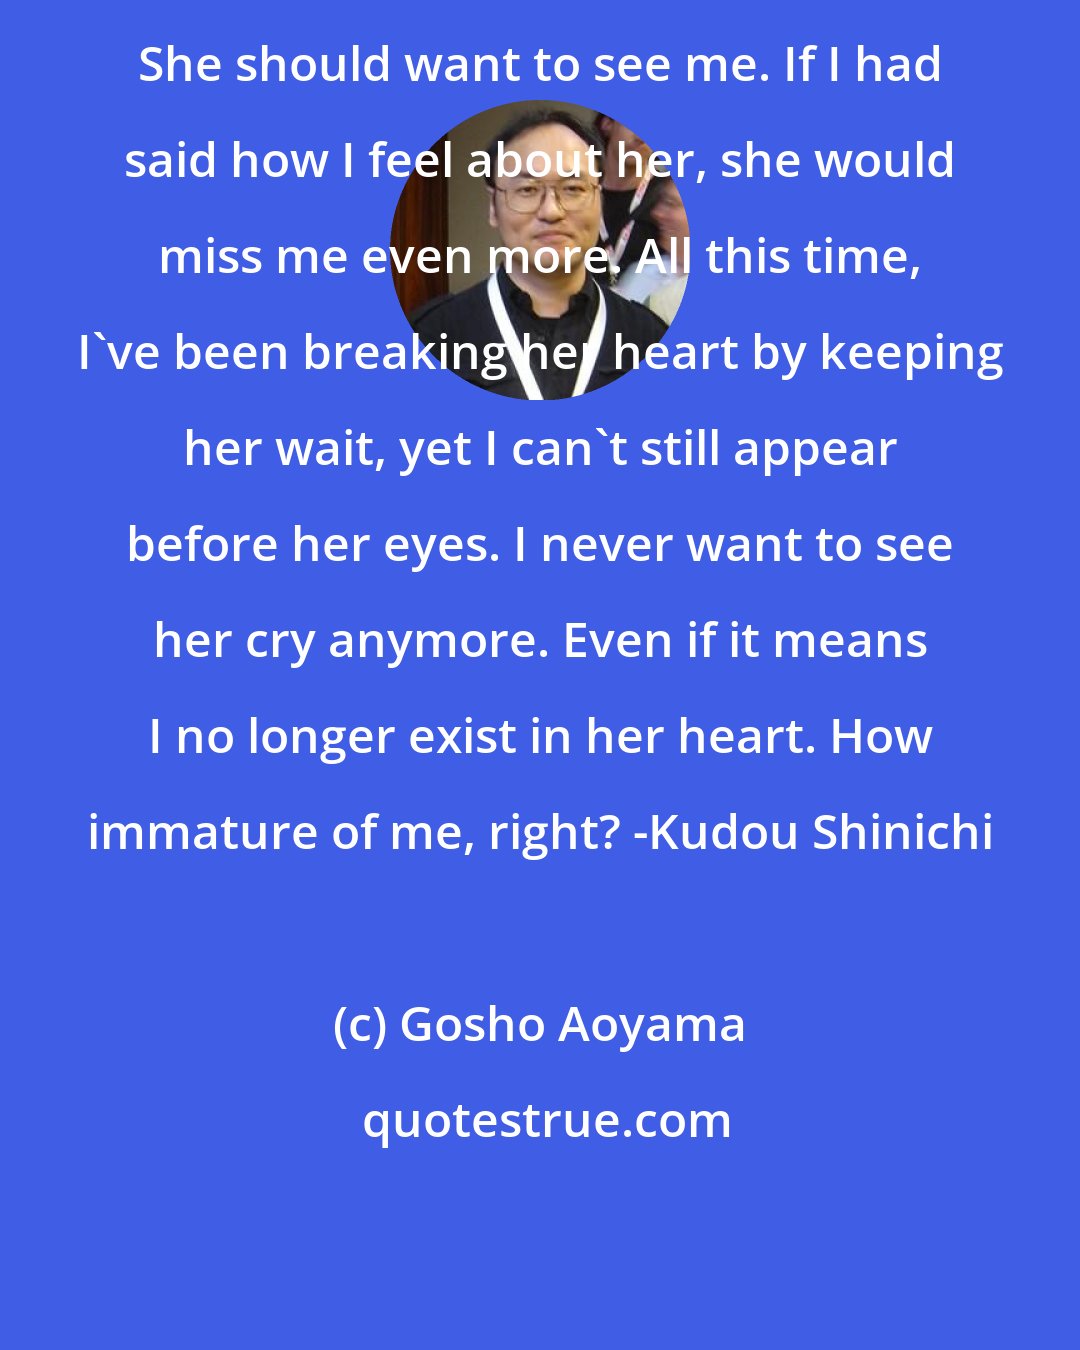 Gosho Aoyama: She should want to see me. If I had said how I feel about her, she would miss me even more. All this time, I've been breaking her heart by keeping her wait, yet I can't still appear before her eyes. I never want to see her cry anymore. Even if it means I no longer exist in her heart. How immature of me, right? -Kudou Shinichi